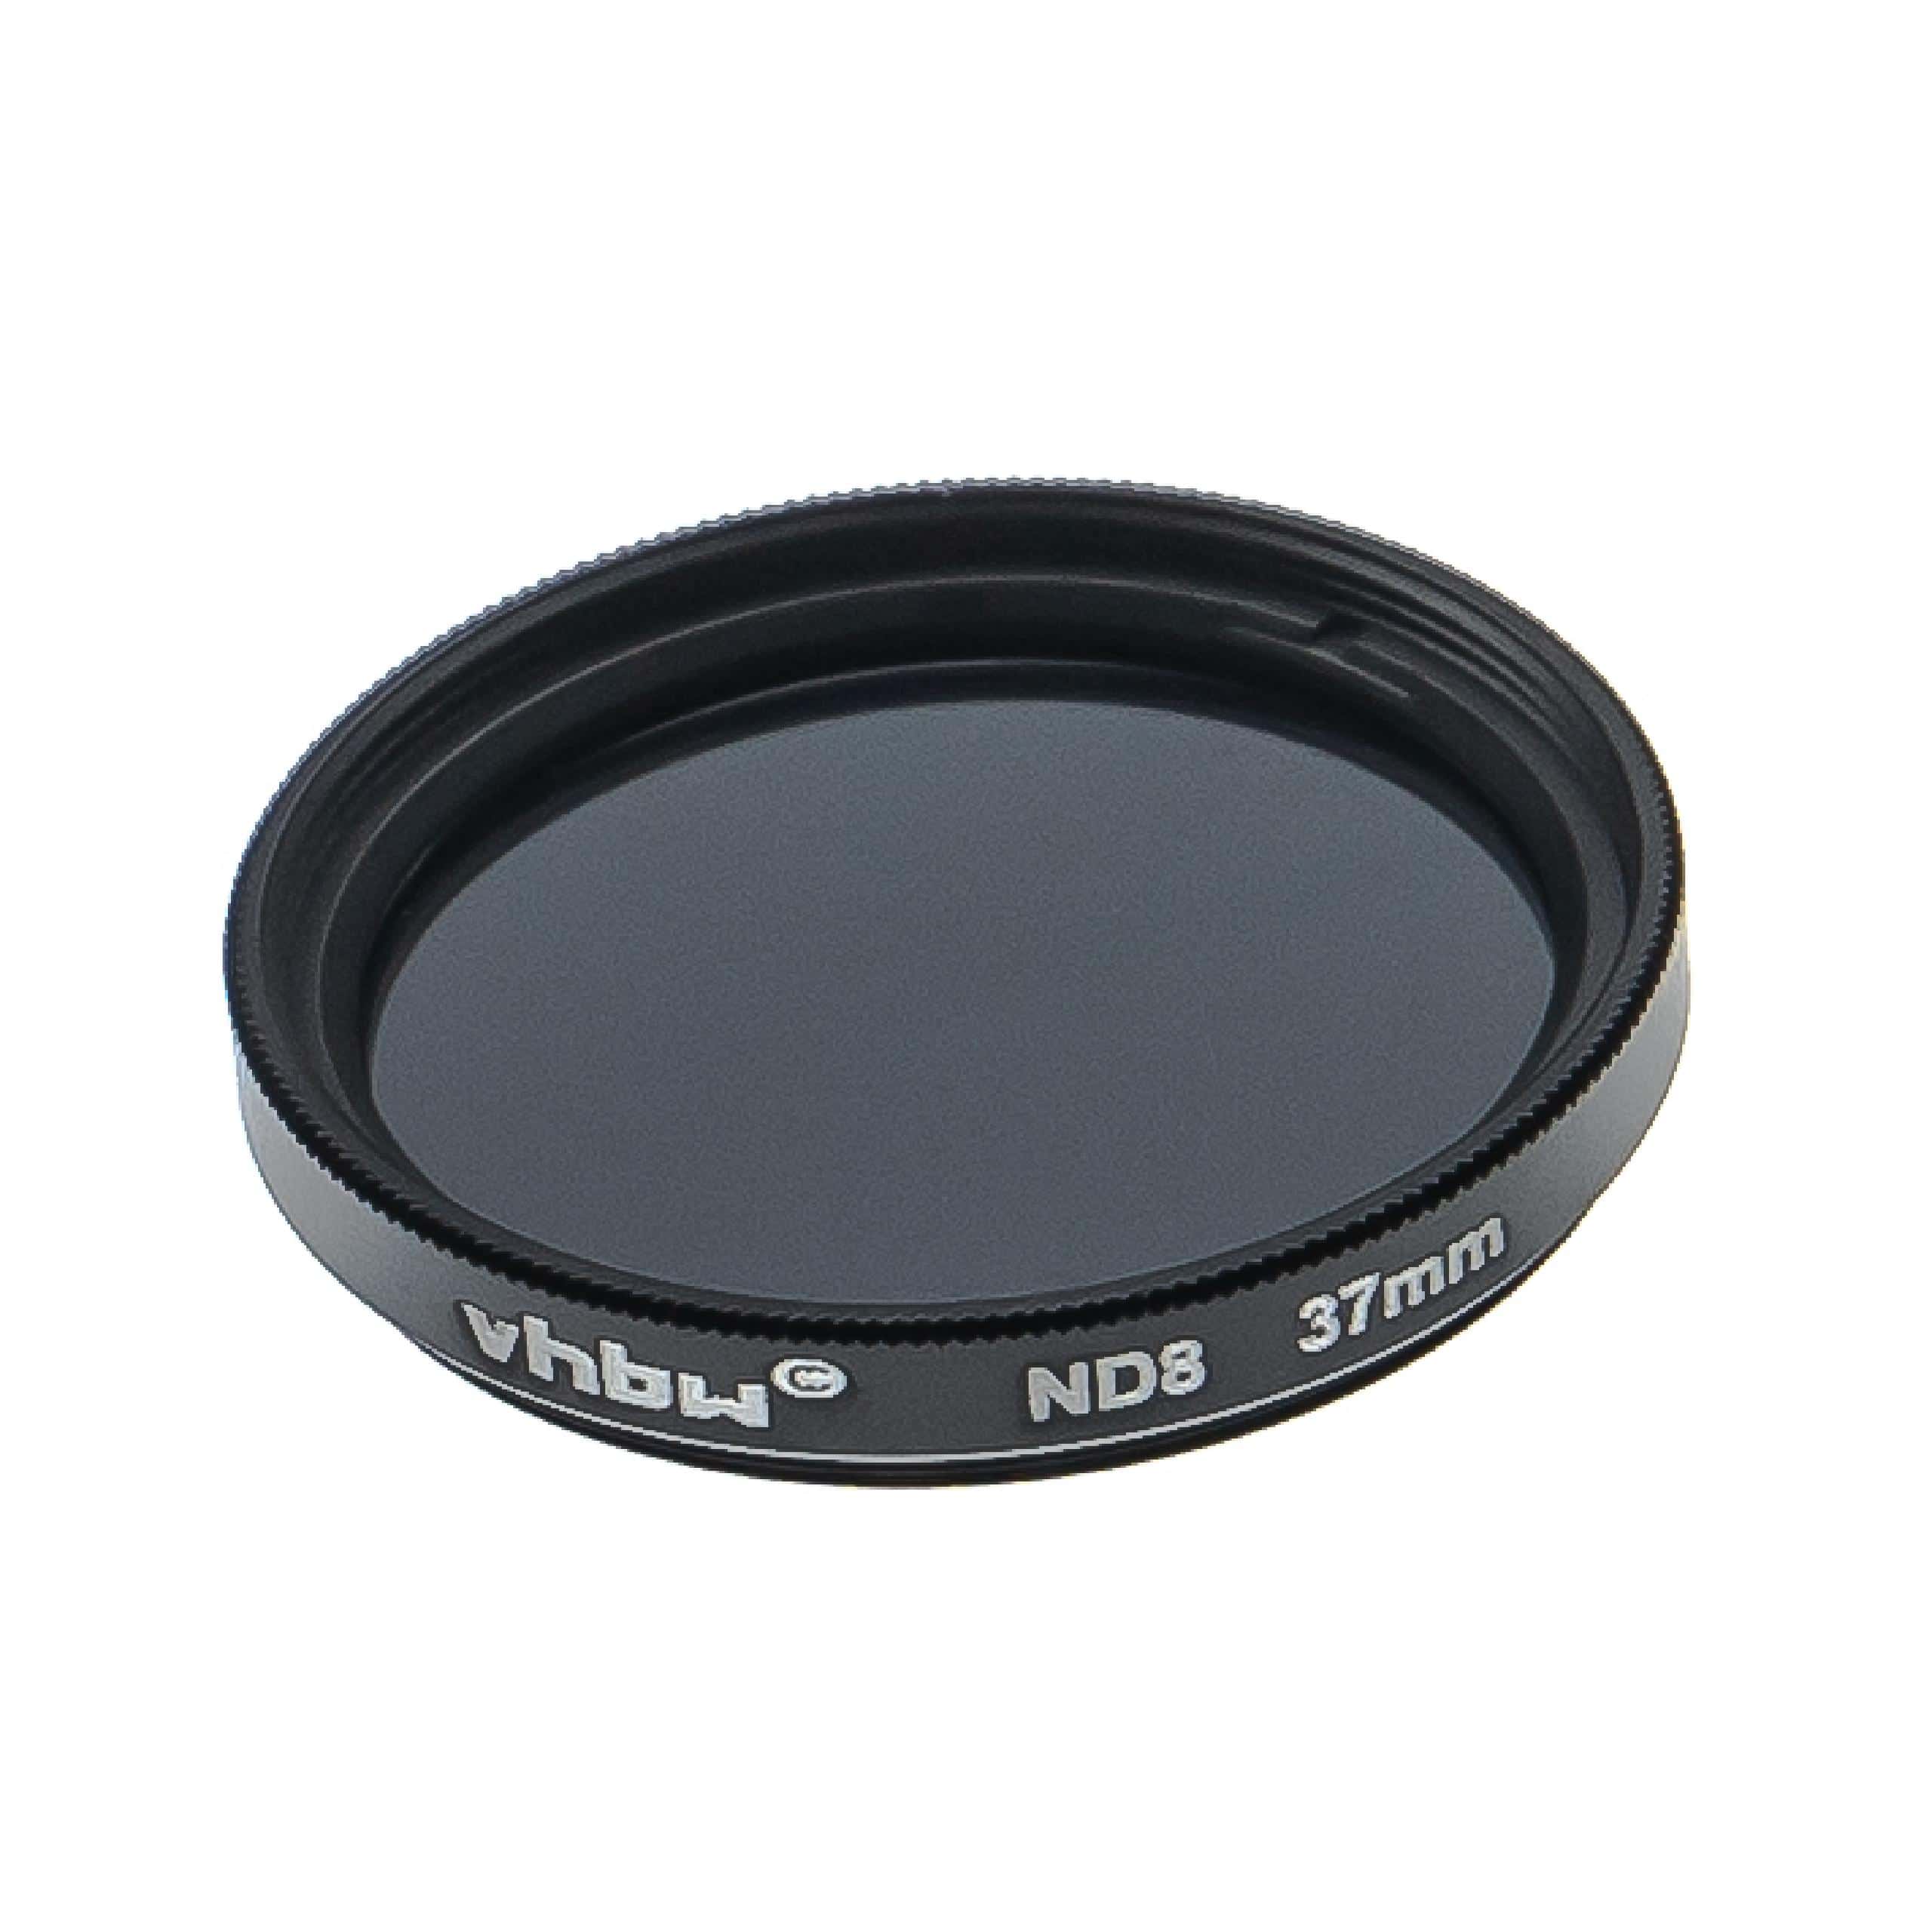 Universal ND Filter ND 8 suitable for Camera Lenses with 37 mm Filter Thread - Grey Filter